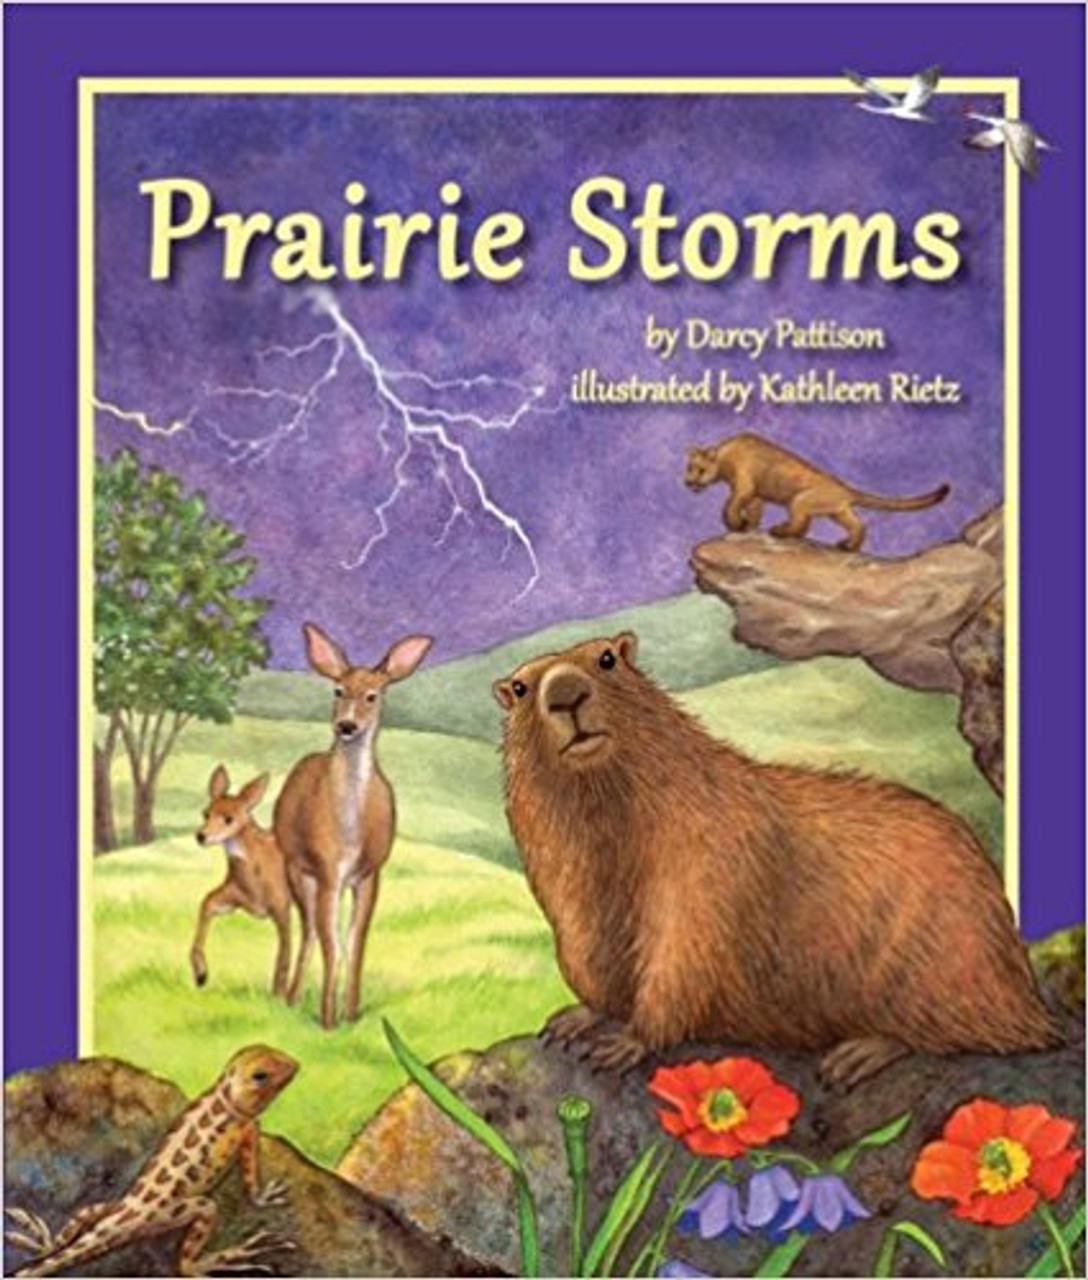 Explore the prairie ecosystem through its ever-changing weather.  Each month features a storm typical of that season and a prairie animal who must shelter, hide, escape, or endure those storms.